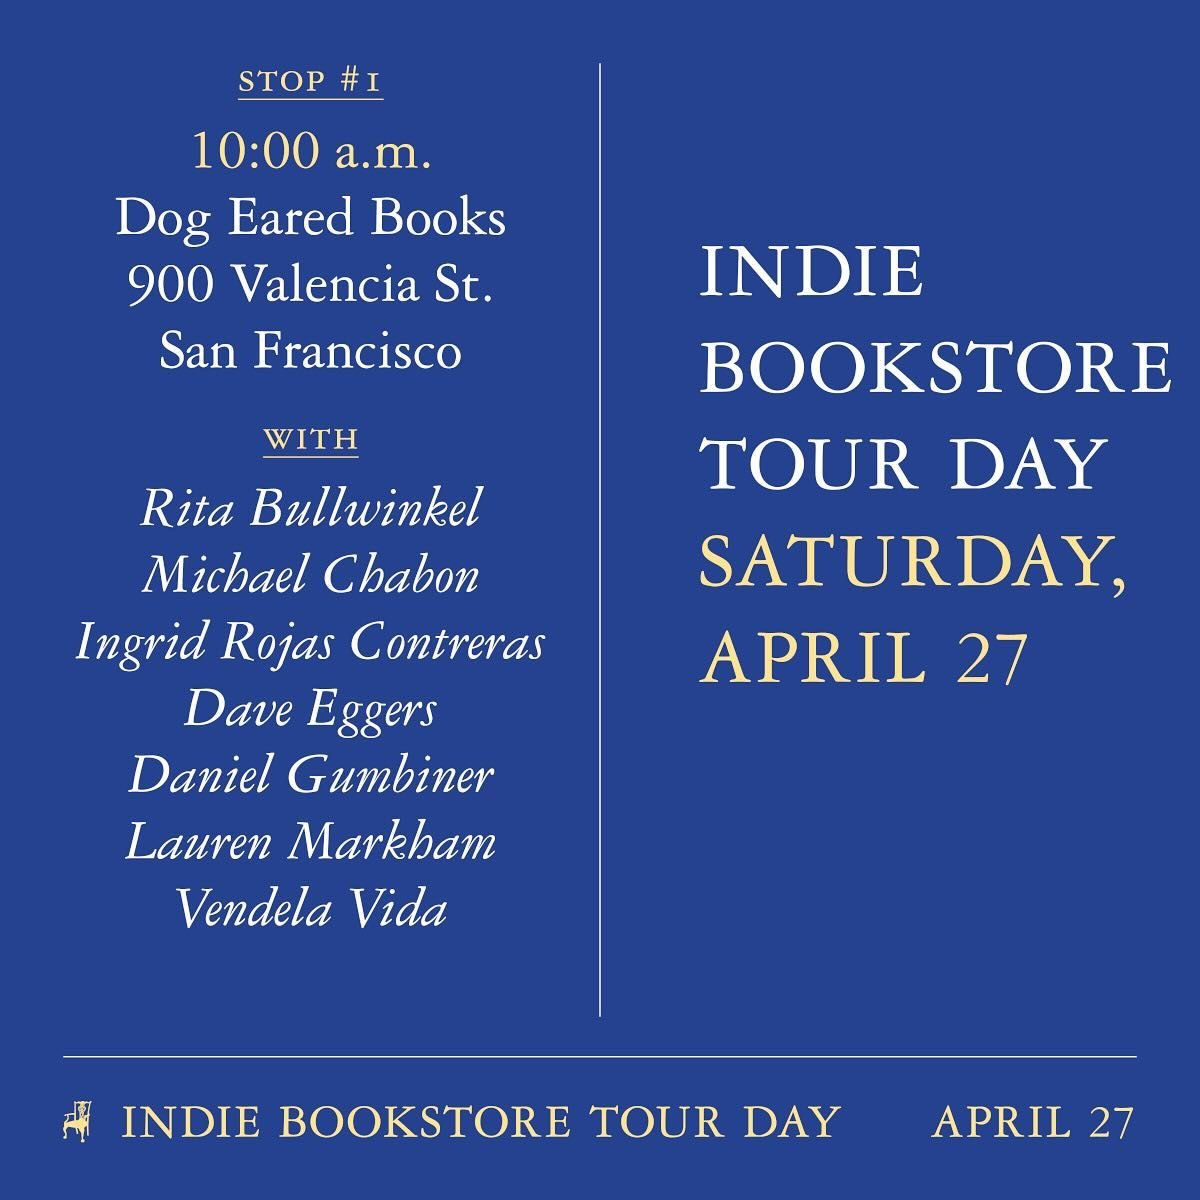 Indie Bookstore Day is this Saturday the 27th! We will be hosting these authors to start the day off at 10am, hanging out and signing books. We are also one of the stops for the bikes to bookstores day for the sf bike coalition. Cruise by this saturd